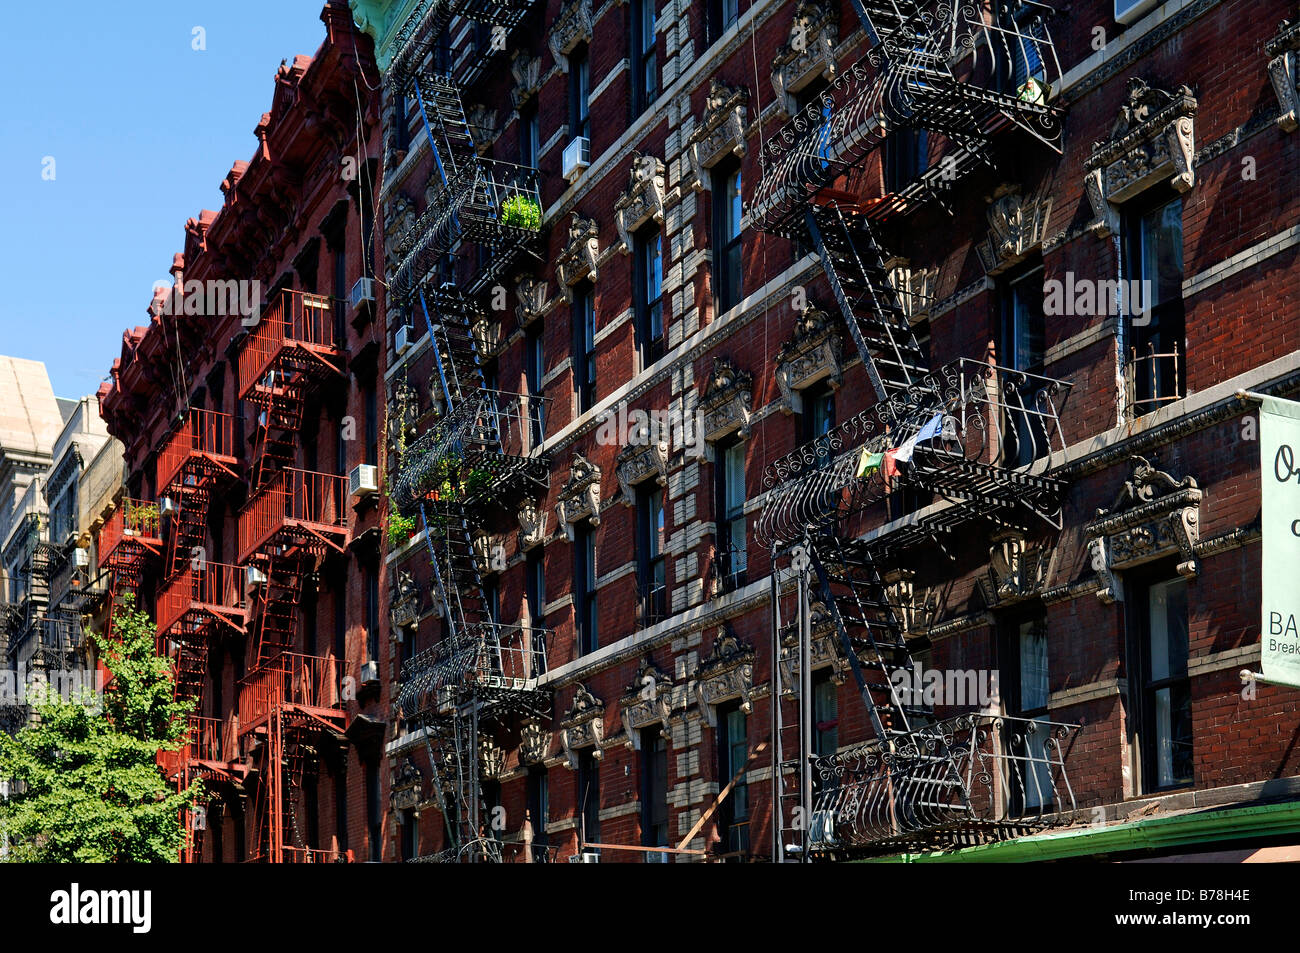 Fire Ladders High Resolution Stock Photography and Images - Alamy